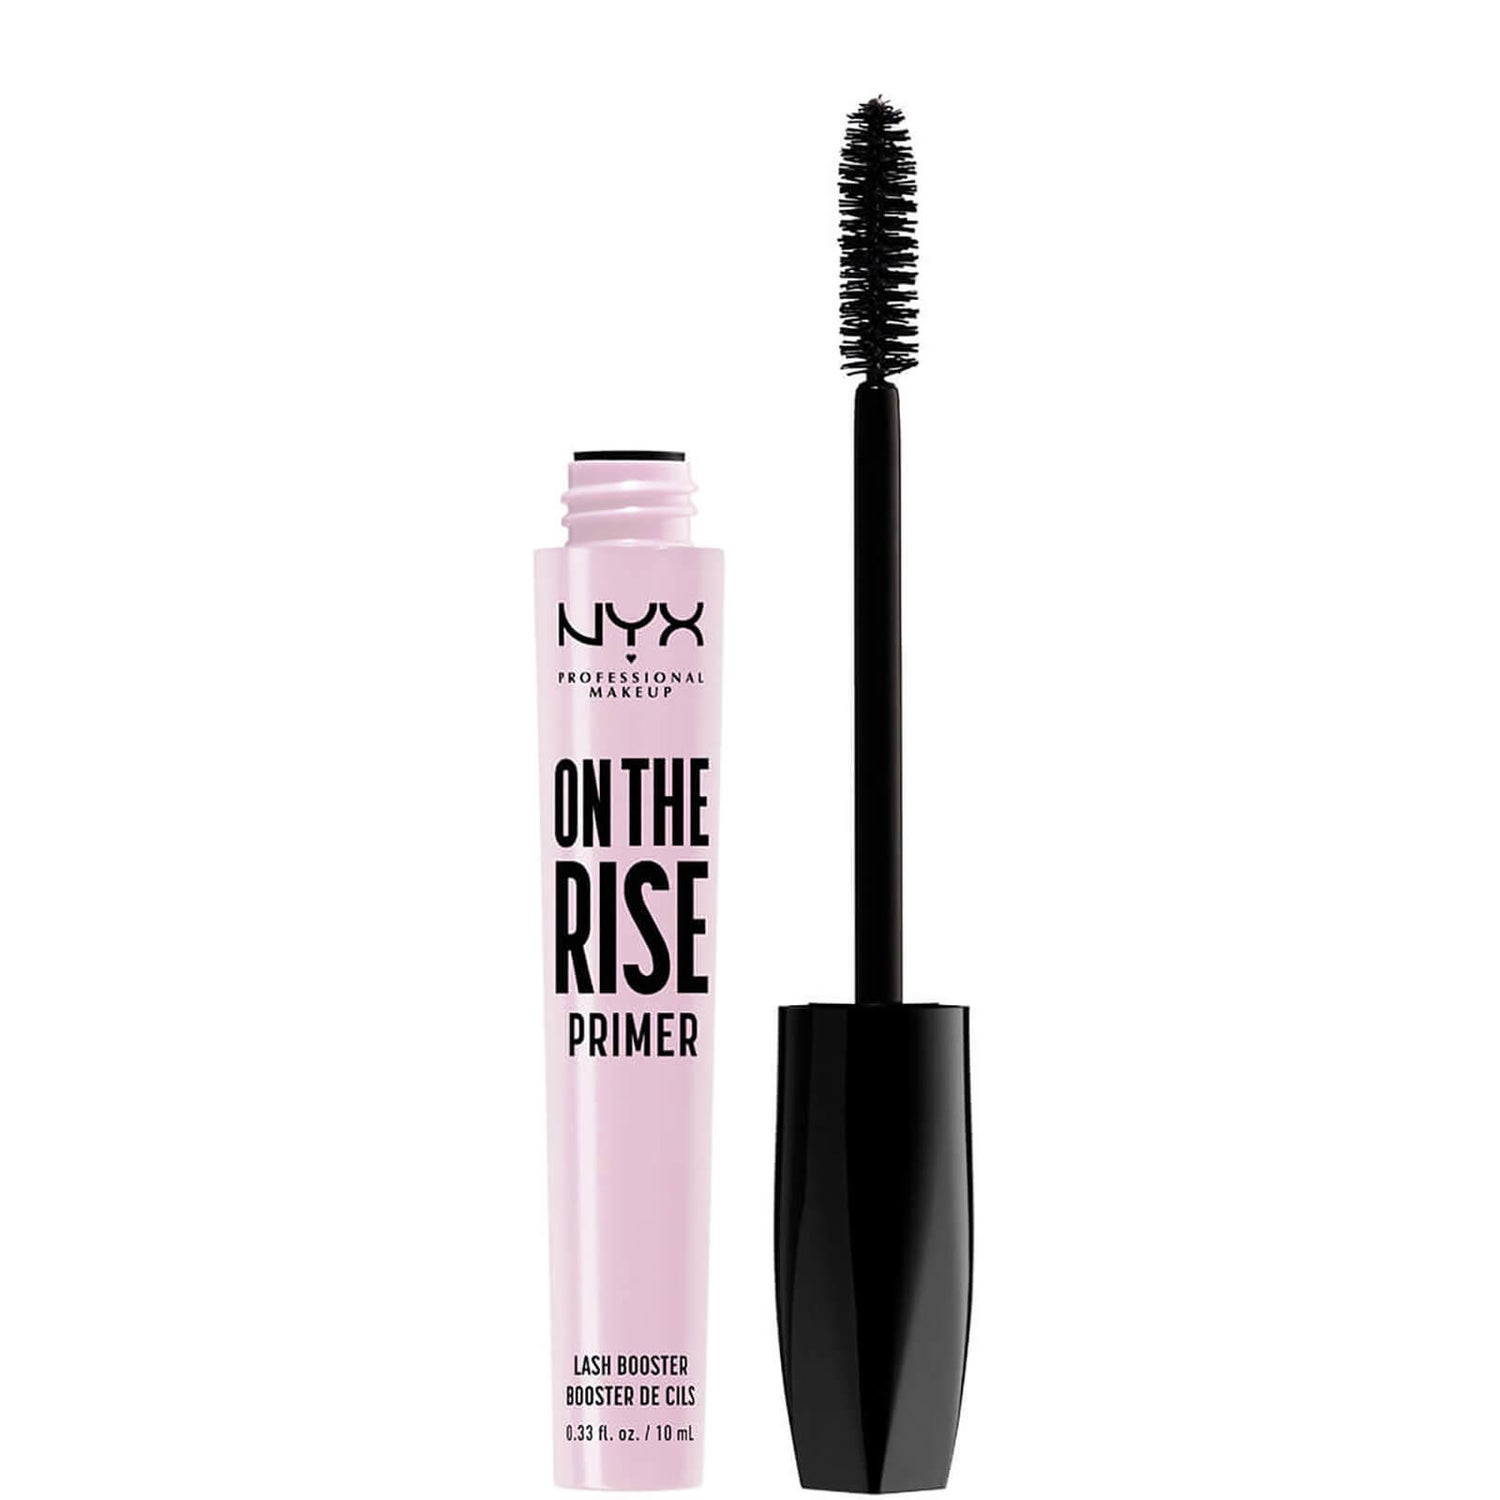 NYX Professional Makeup on the Rise Lash Booster 29g